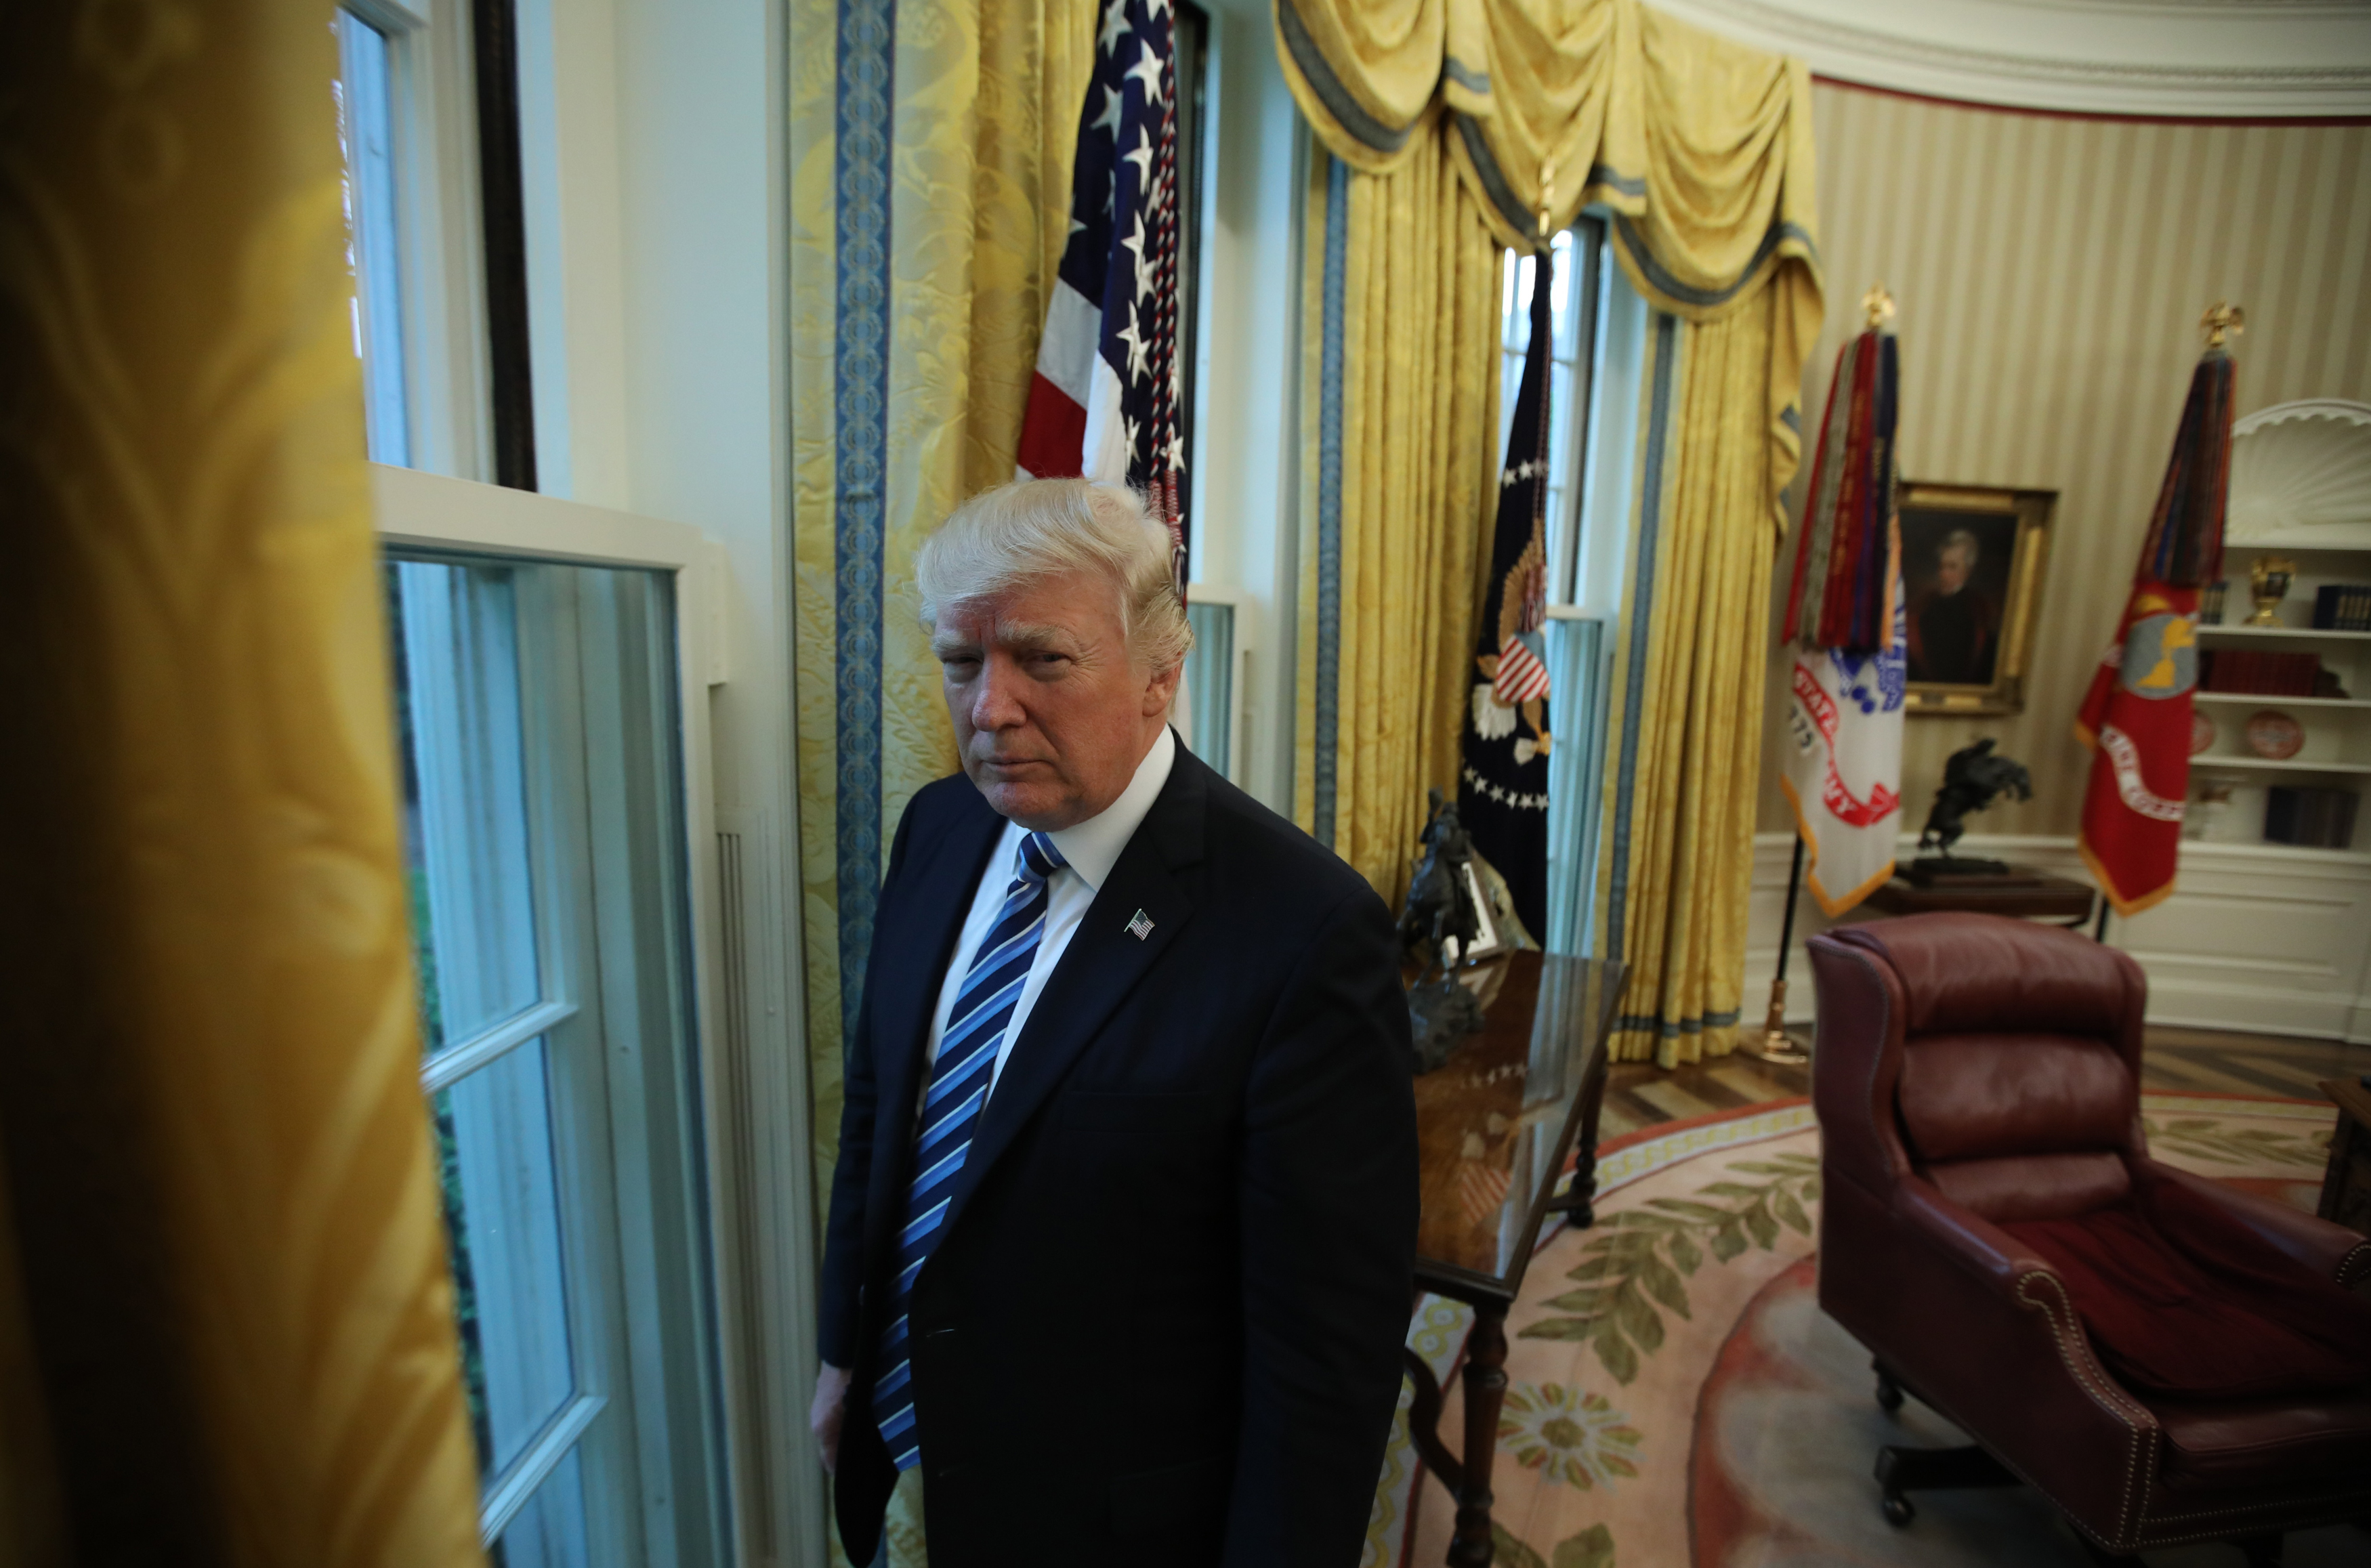 U.S. President Donald Trump stands in the Oval Office following an interview with Reuters at the White House in Washington